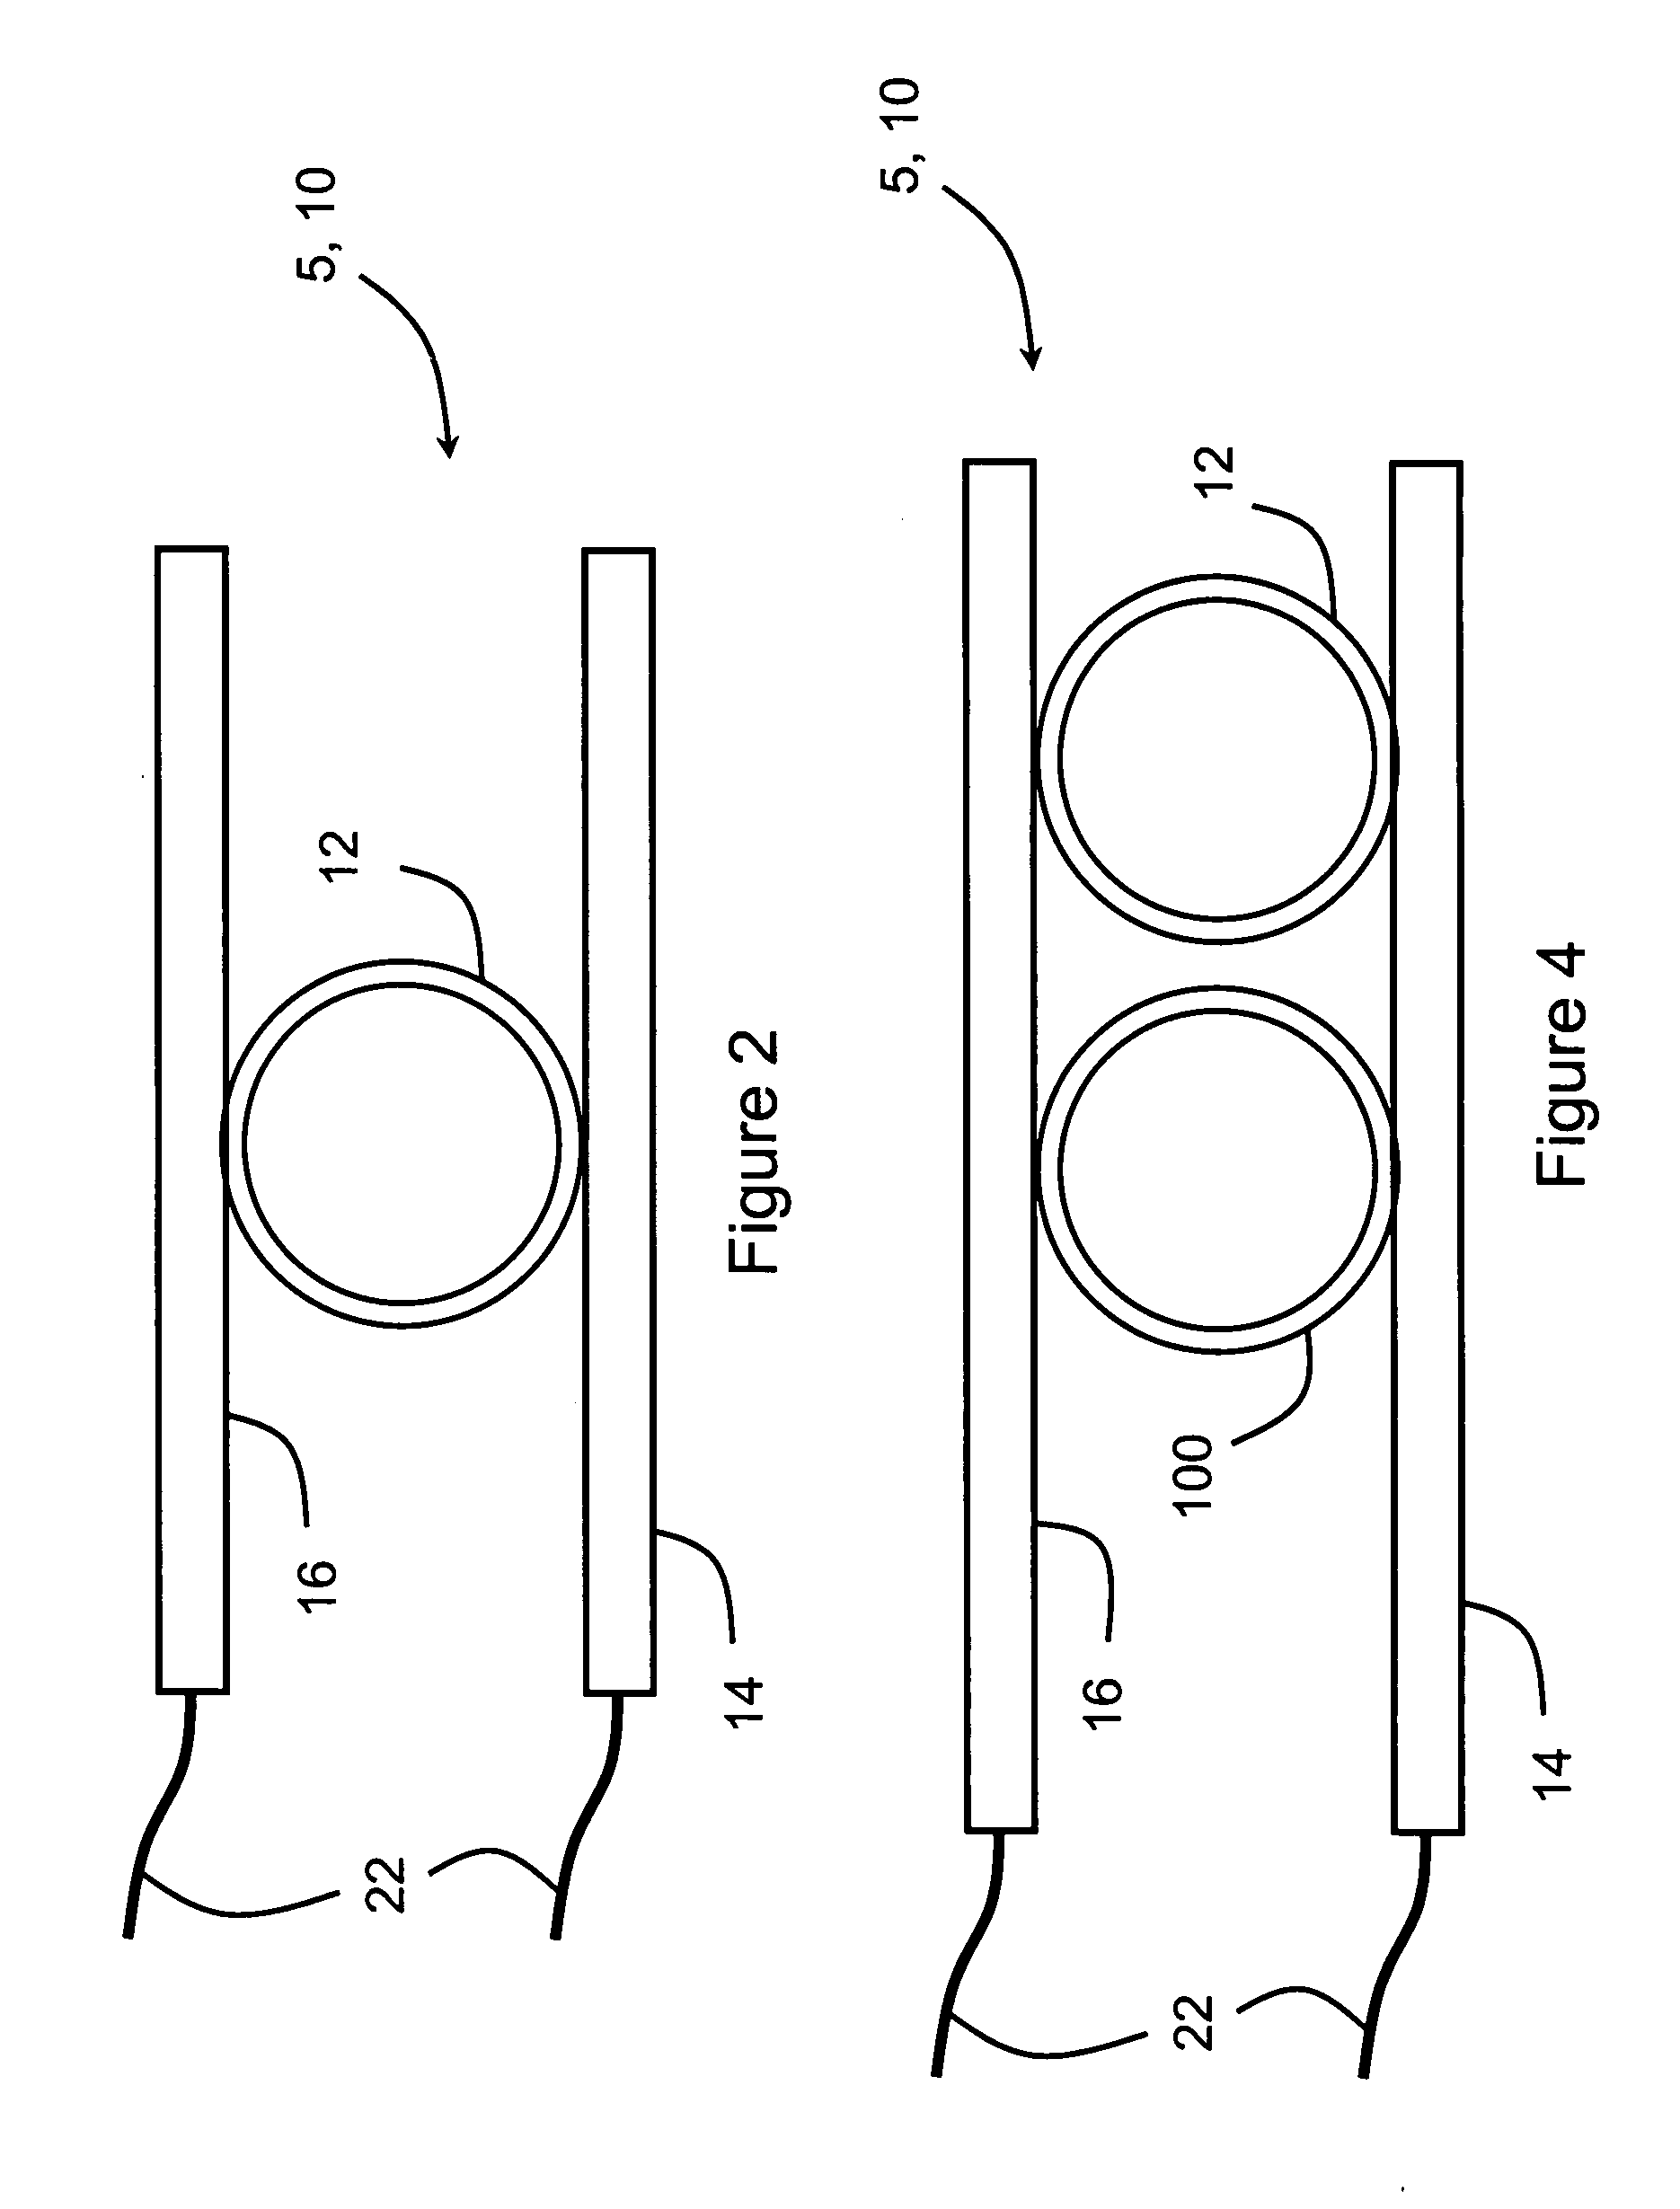 Integrated optical resonator device for measuring chemical and biological analyte concentrations